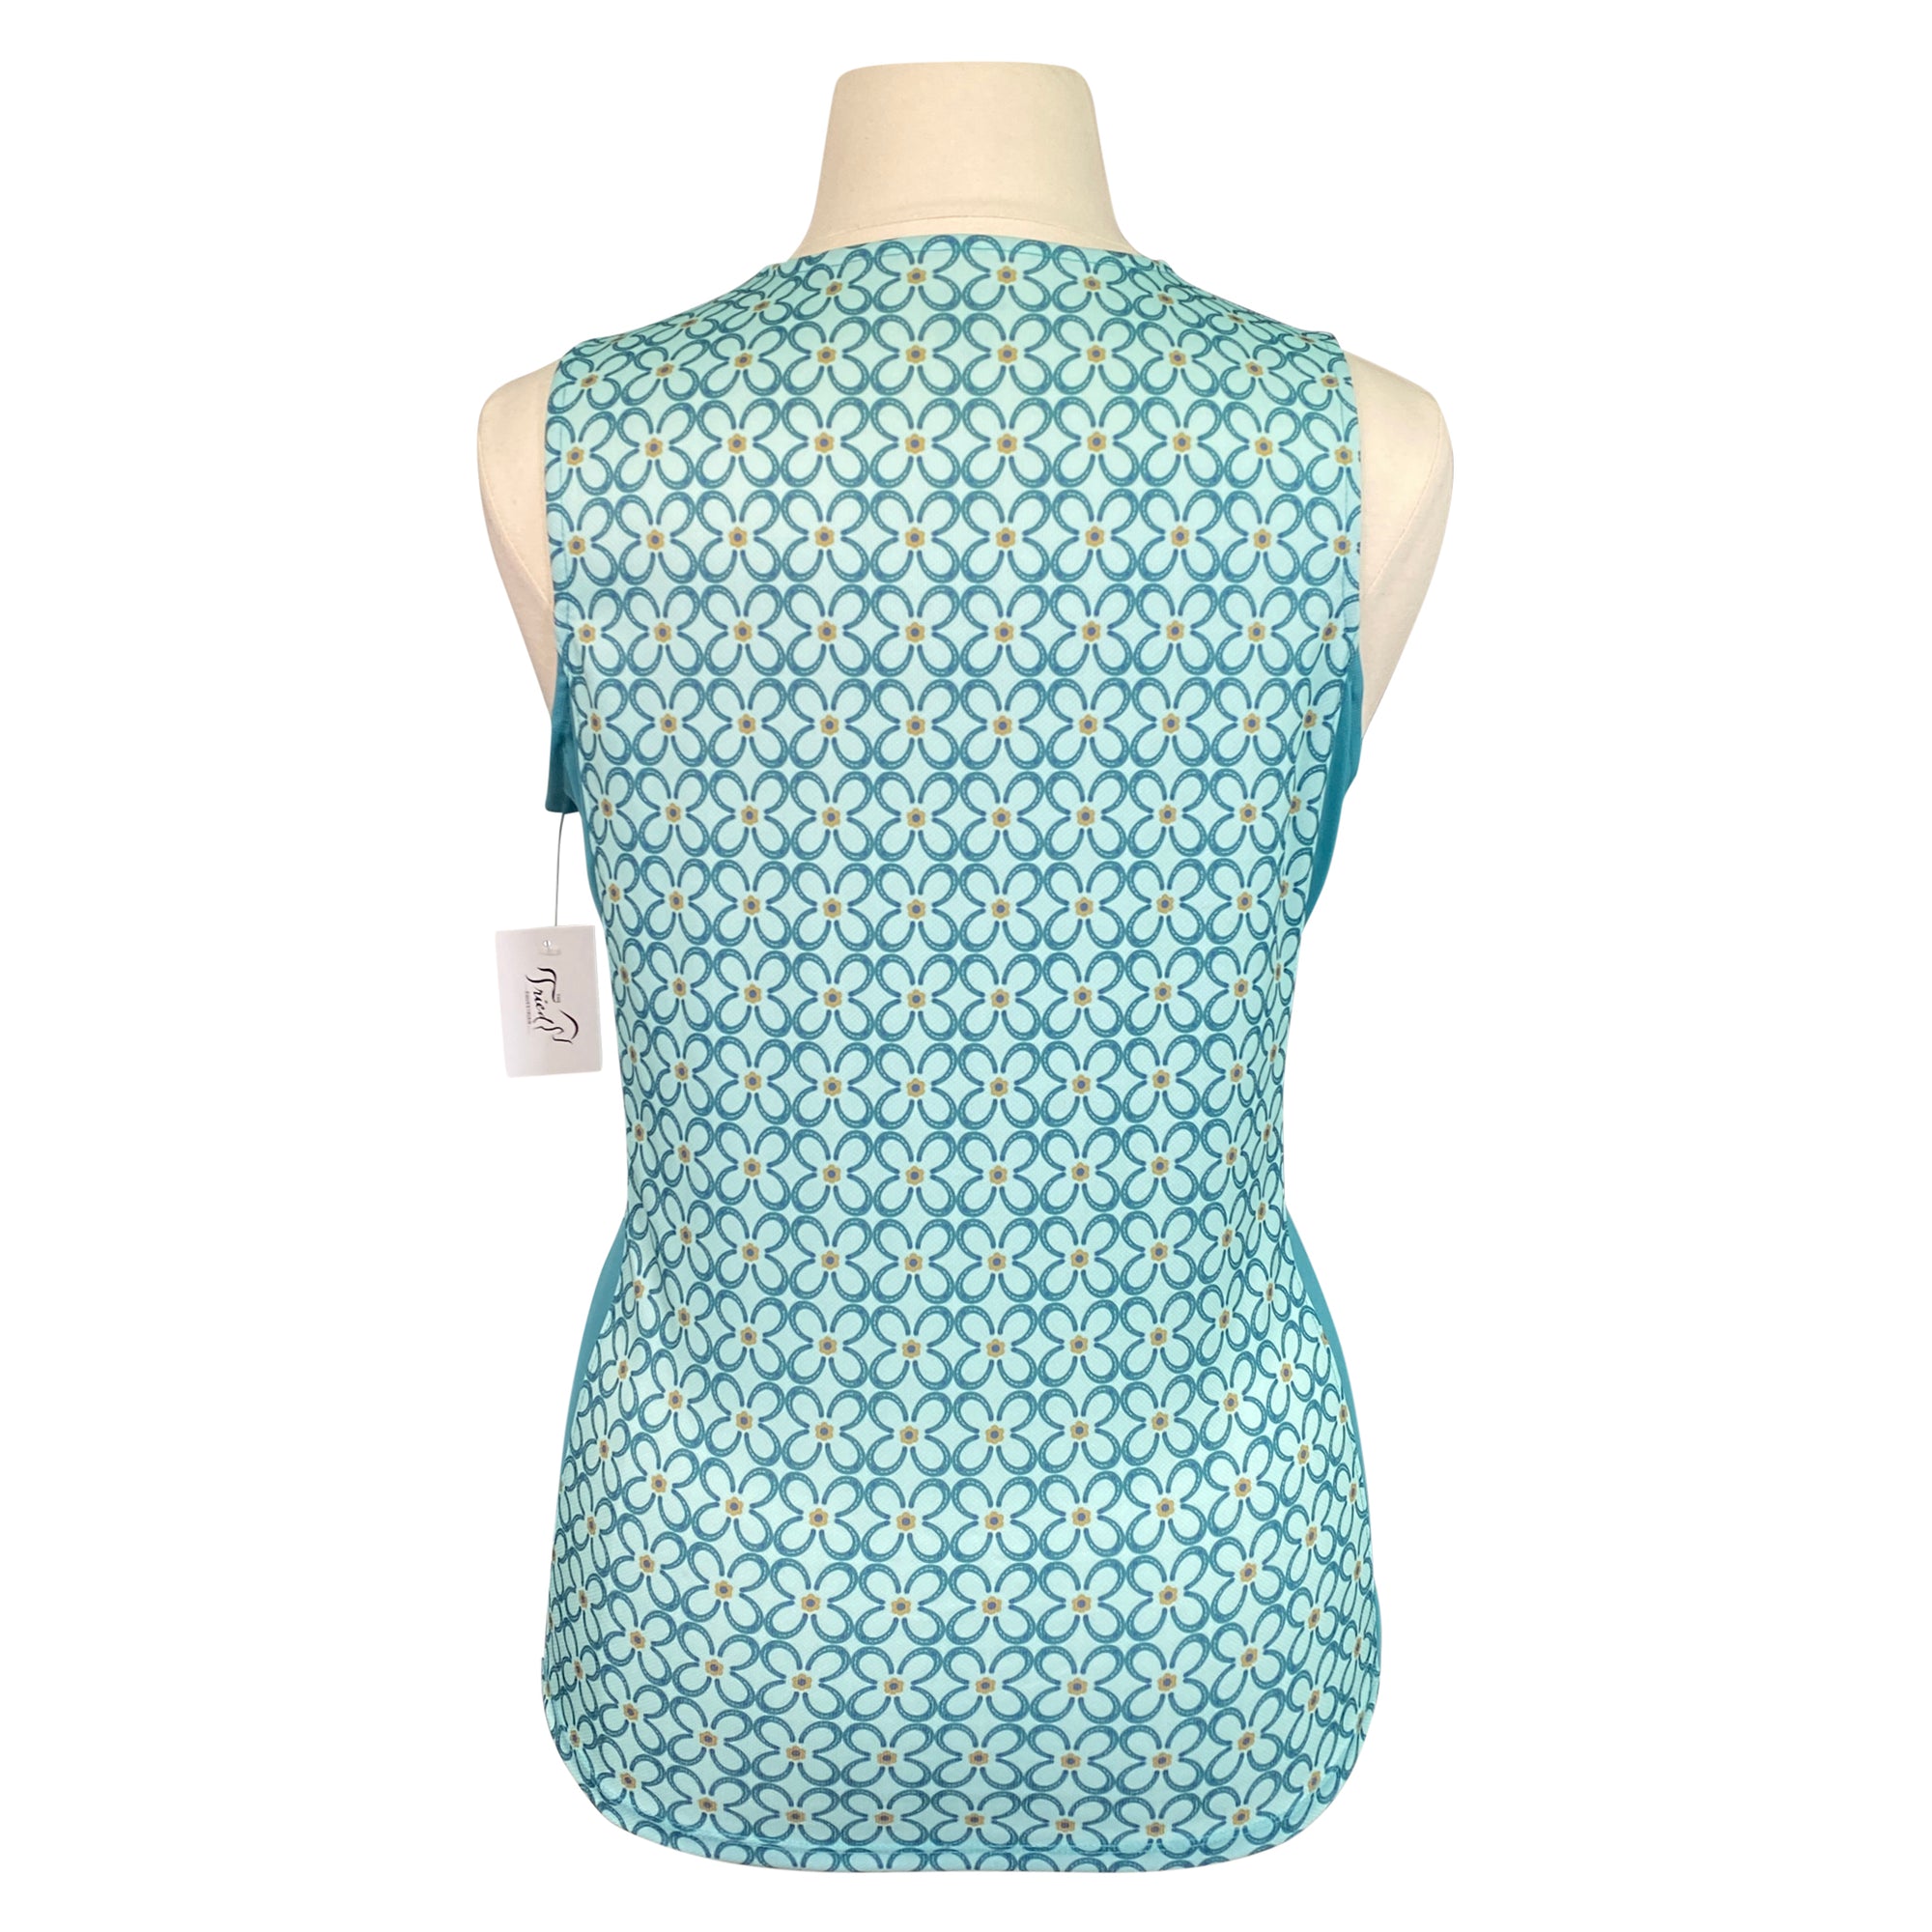 Riding Sport Ladies’ Air Cool Print Tank Top in Mint/Green Horseshoes